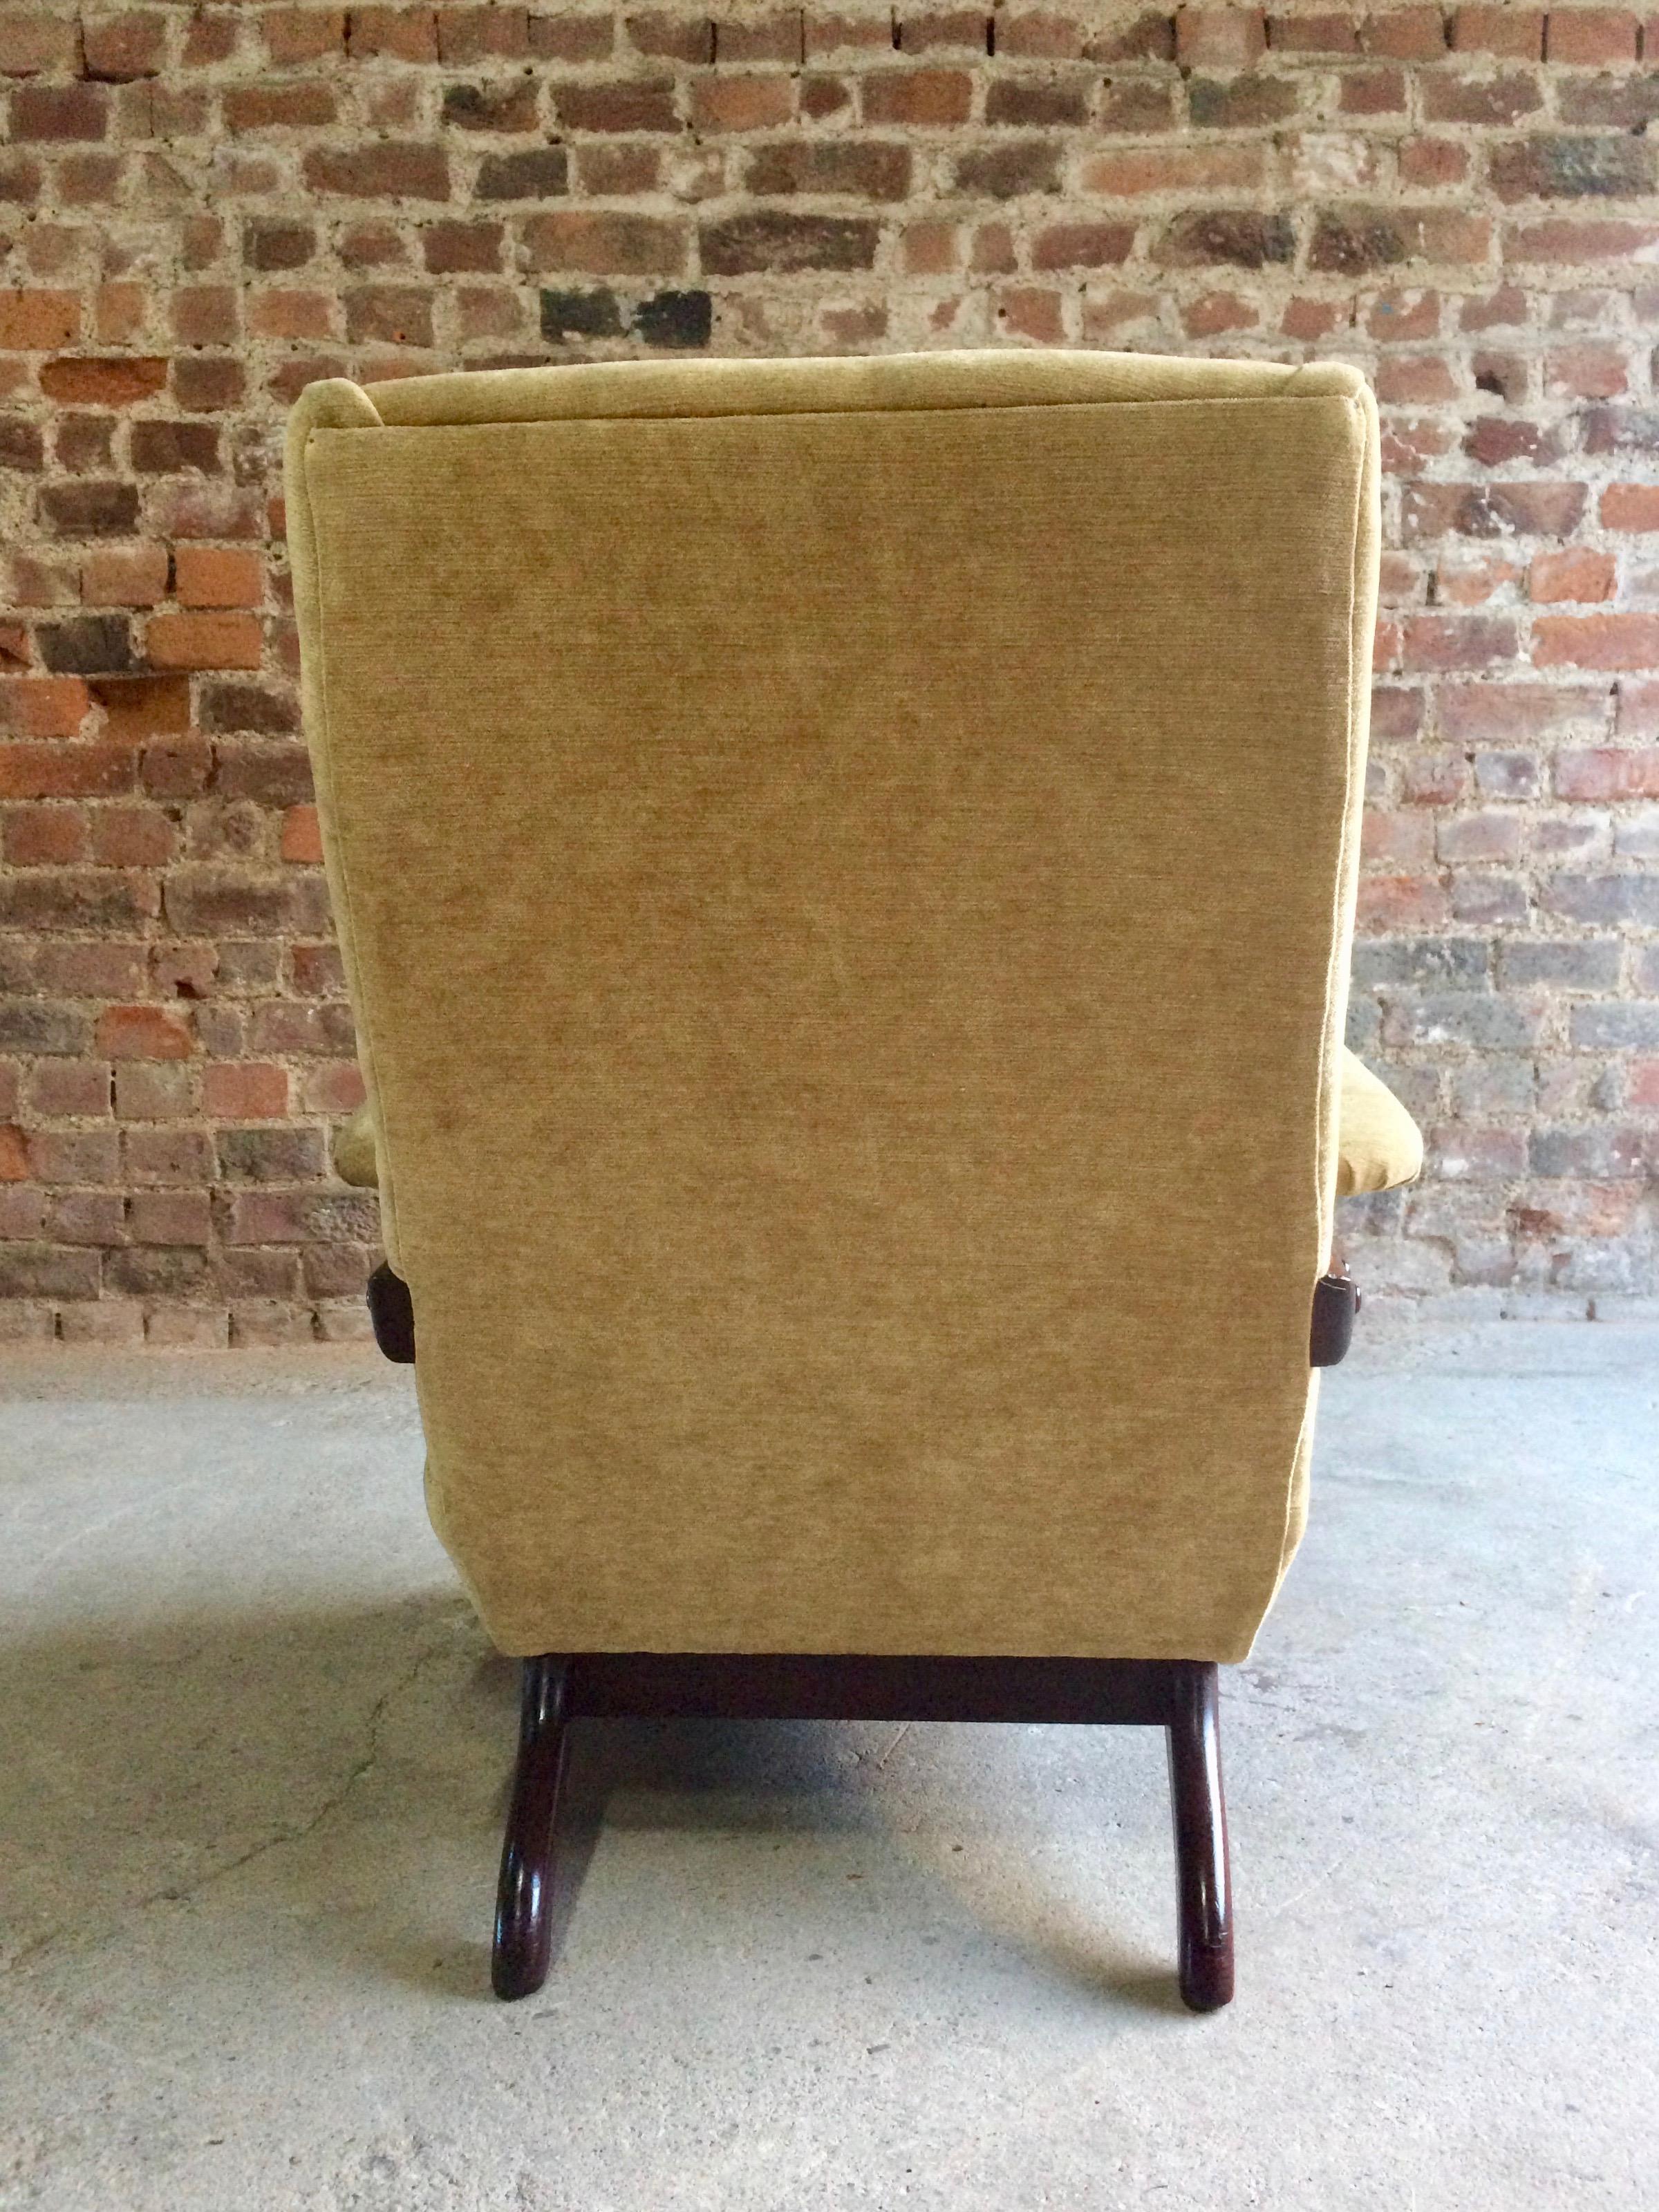 English Midcentury Greaves and Thomas Armchair Lounge Chair, circa 1950s